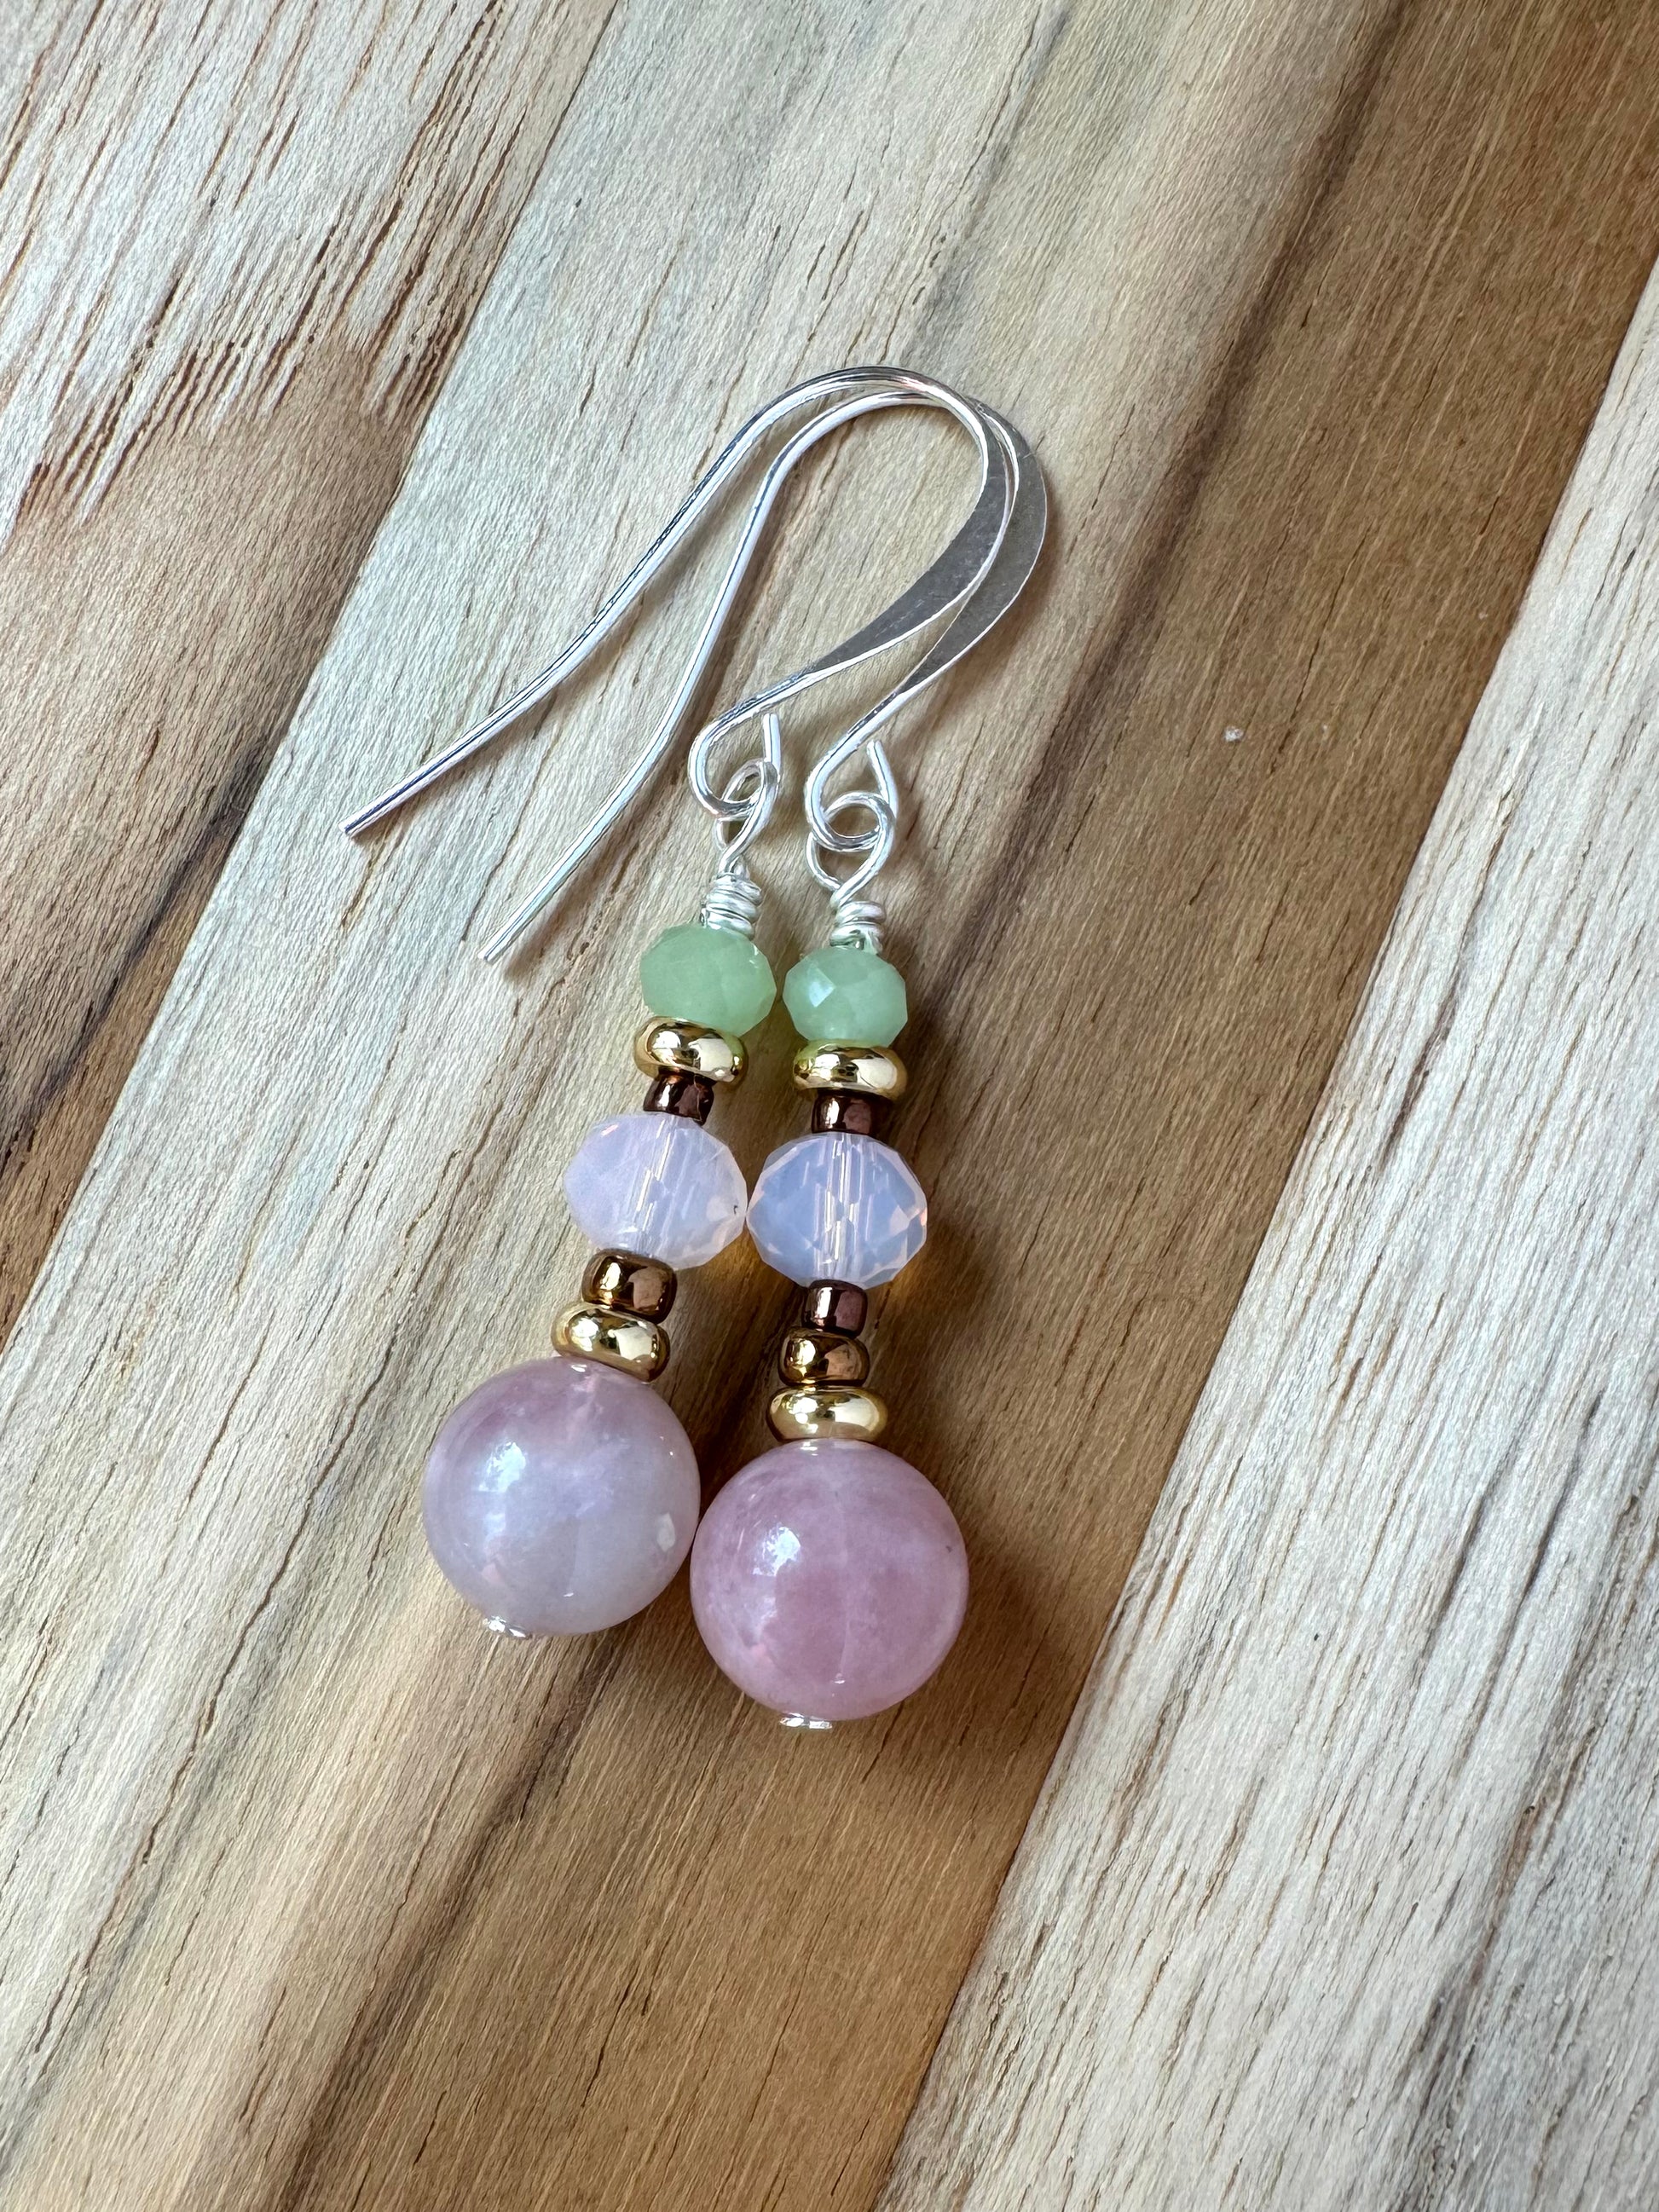 Madagascar Rose Quartz Silver Plated Dangle Earrings with Pink and Green Crystal Glass Beads - My Urban Gems